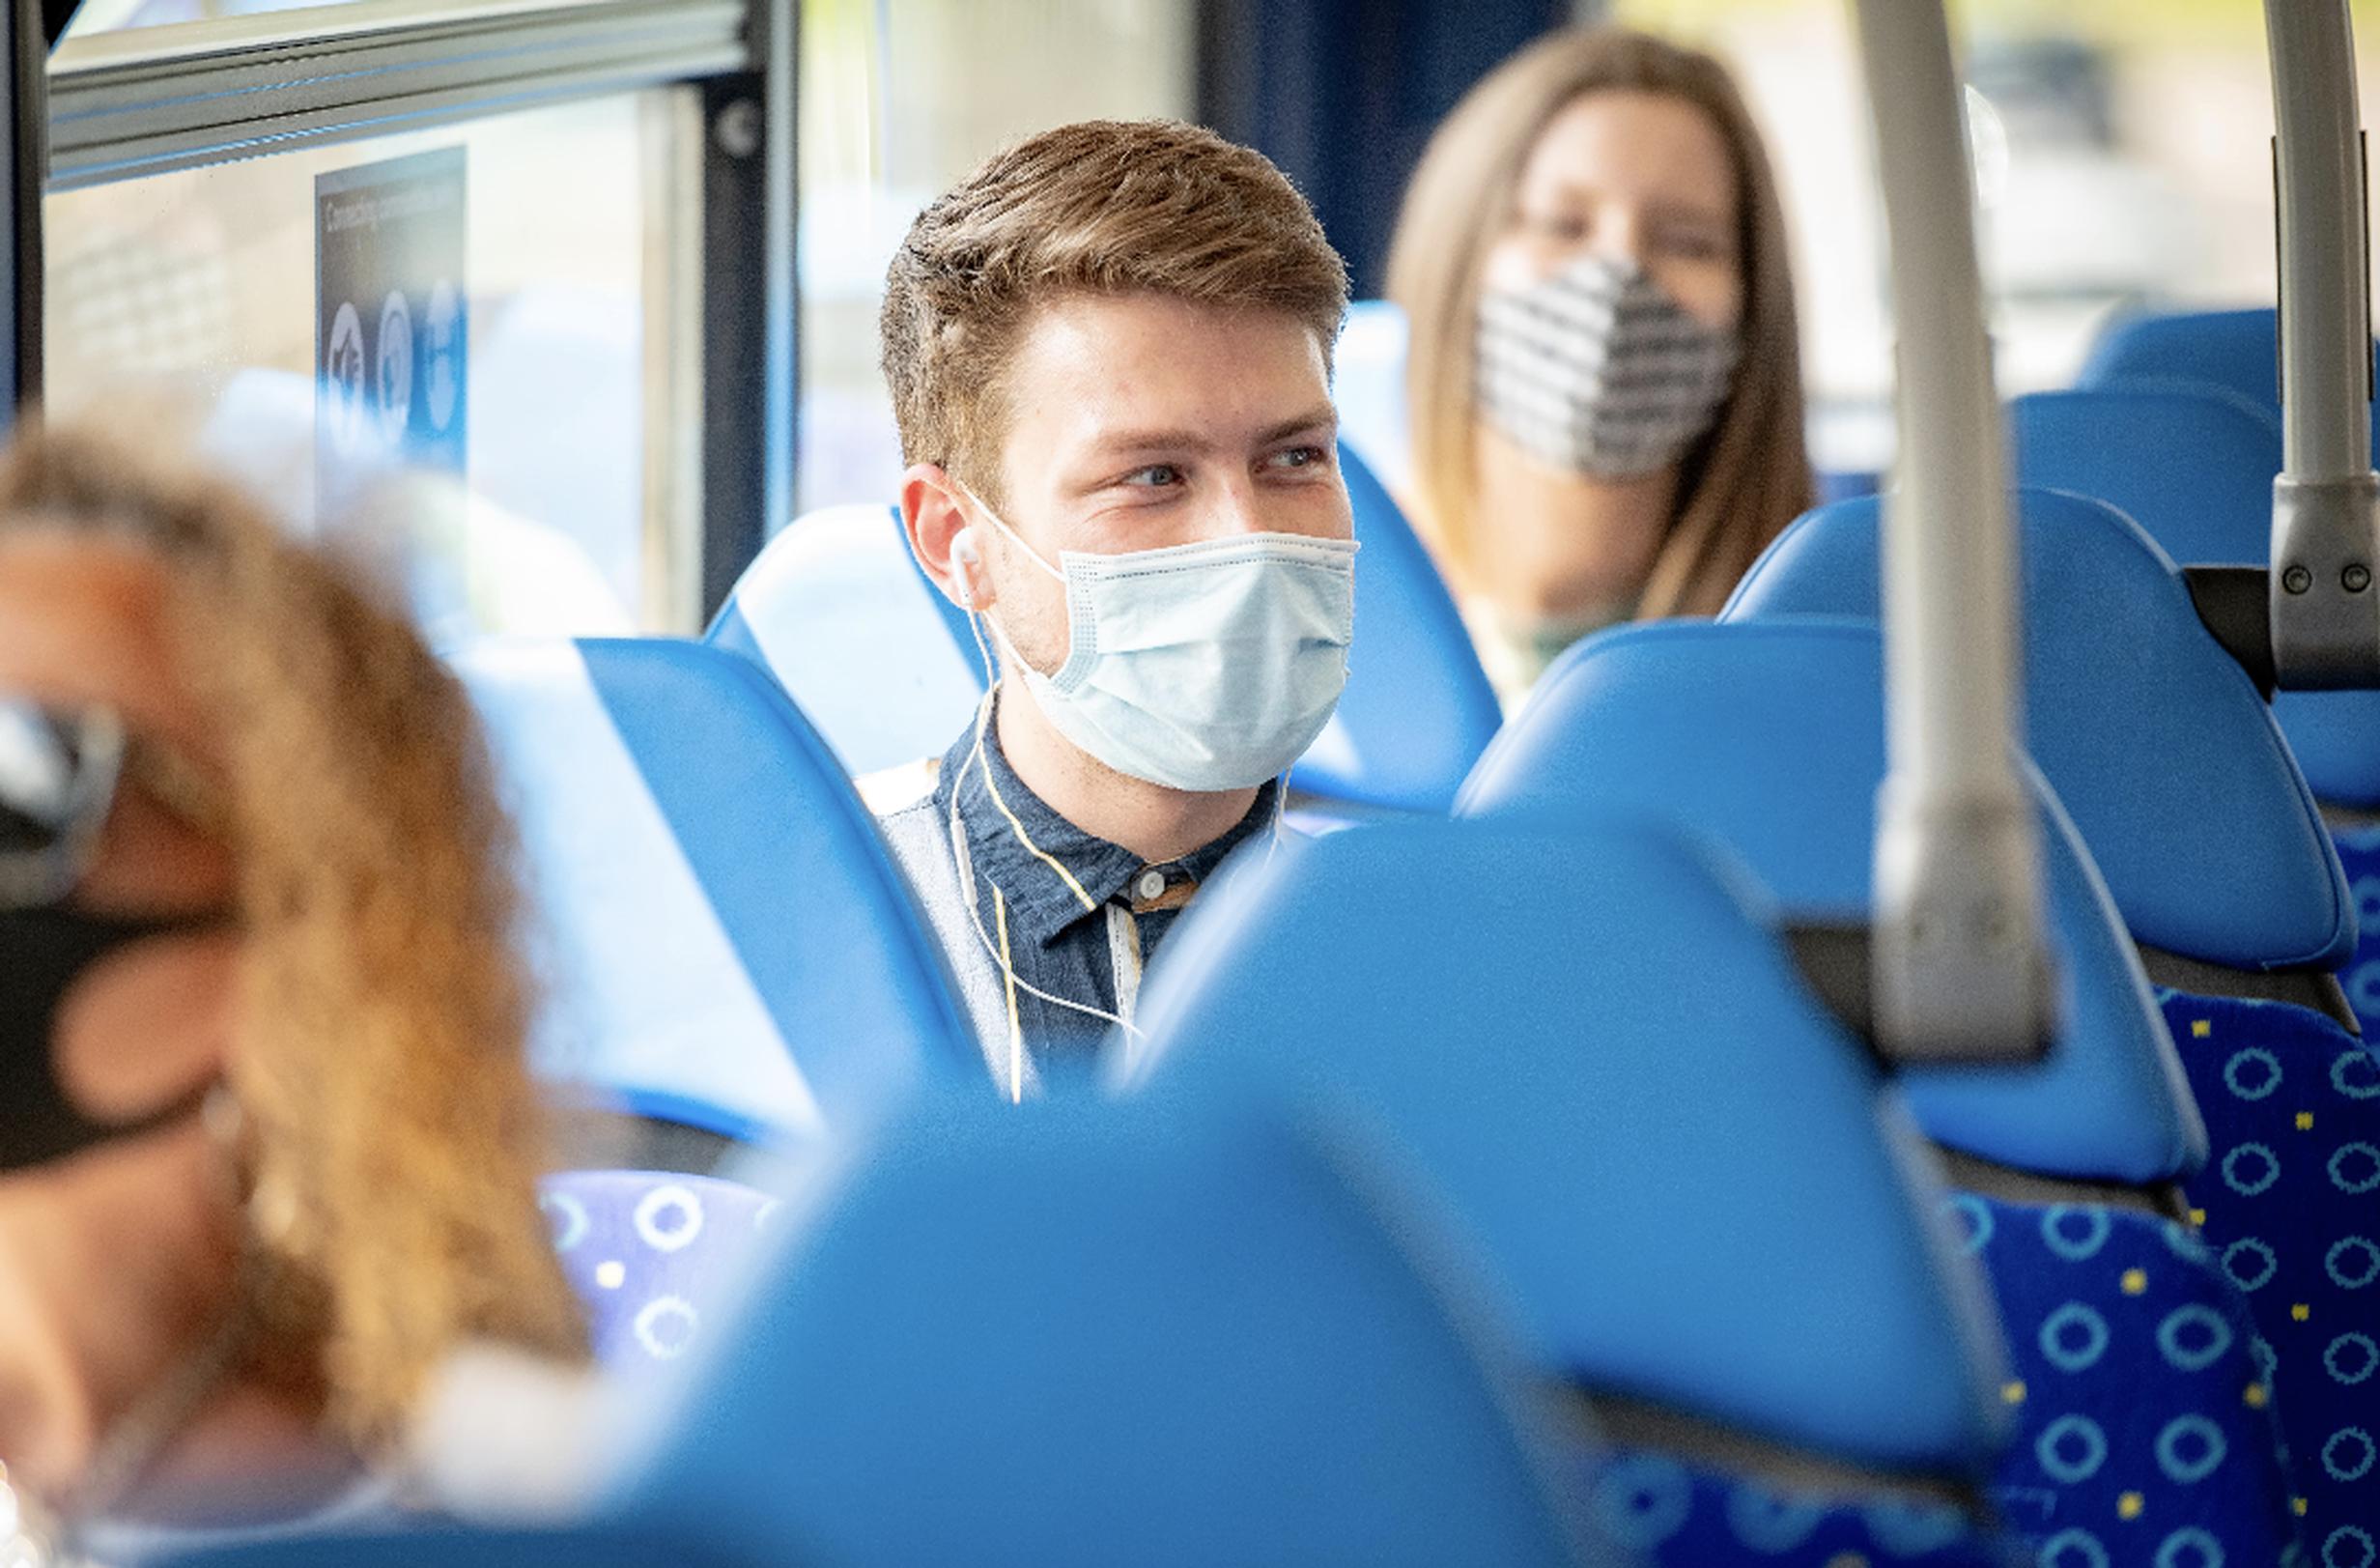 The wearing of face coverings on passenger transport in England is now a matter of personal discretion unless conditions of carriage are amended by the service operator